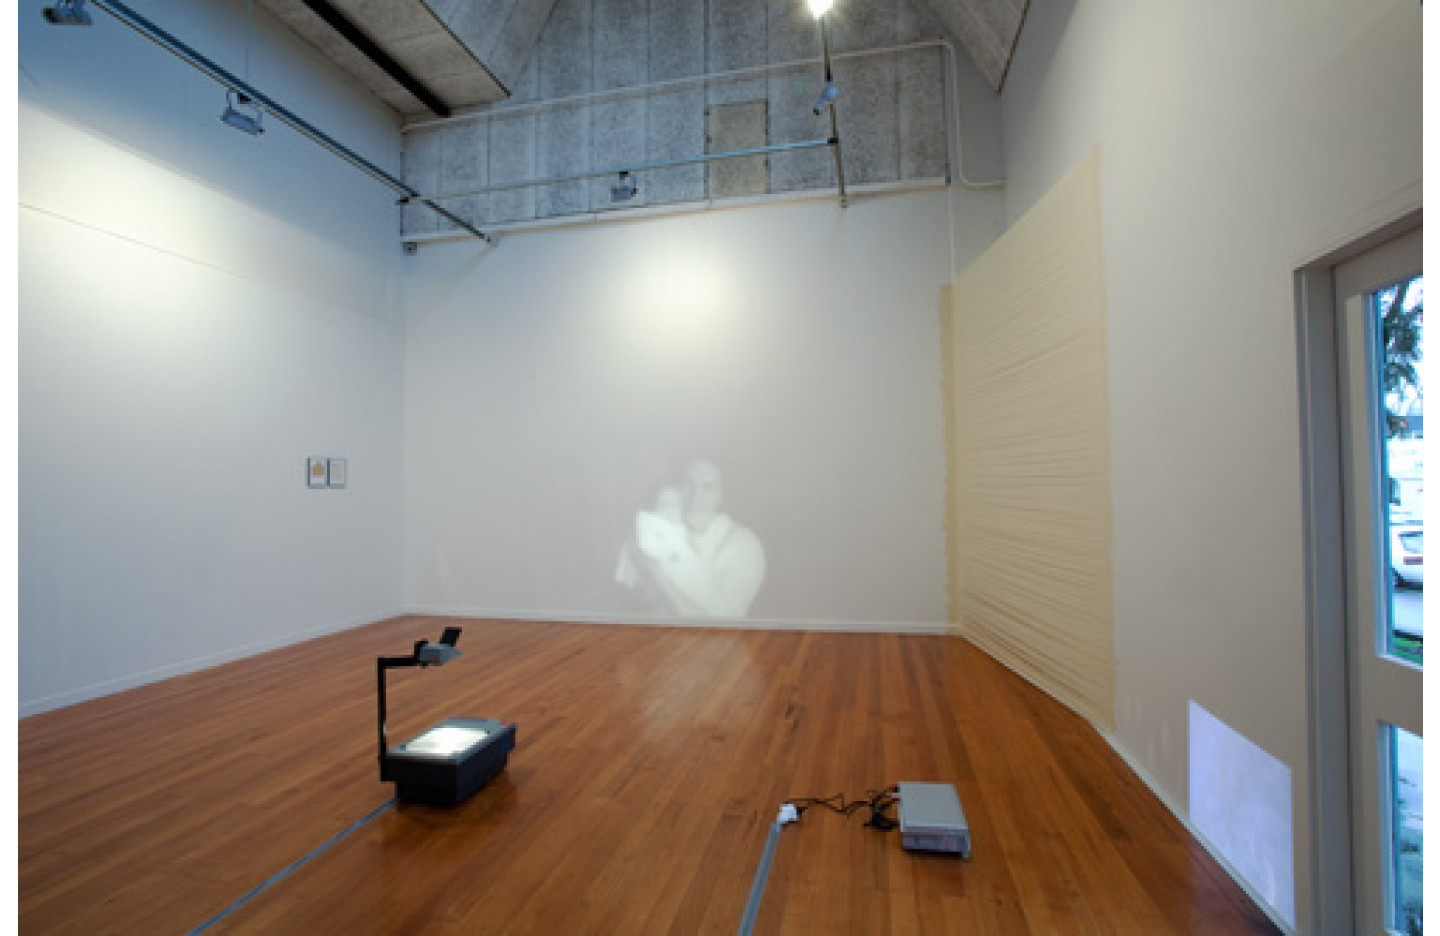 How are you?, Ramp Gallery (2009)